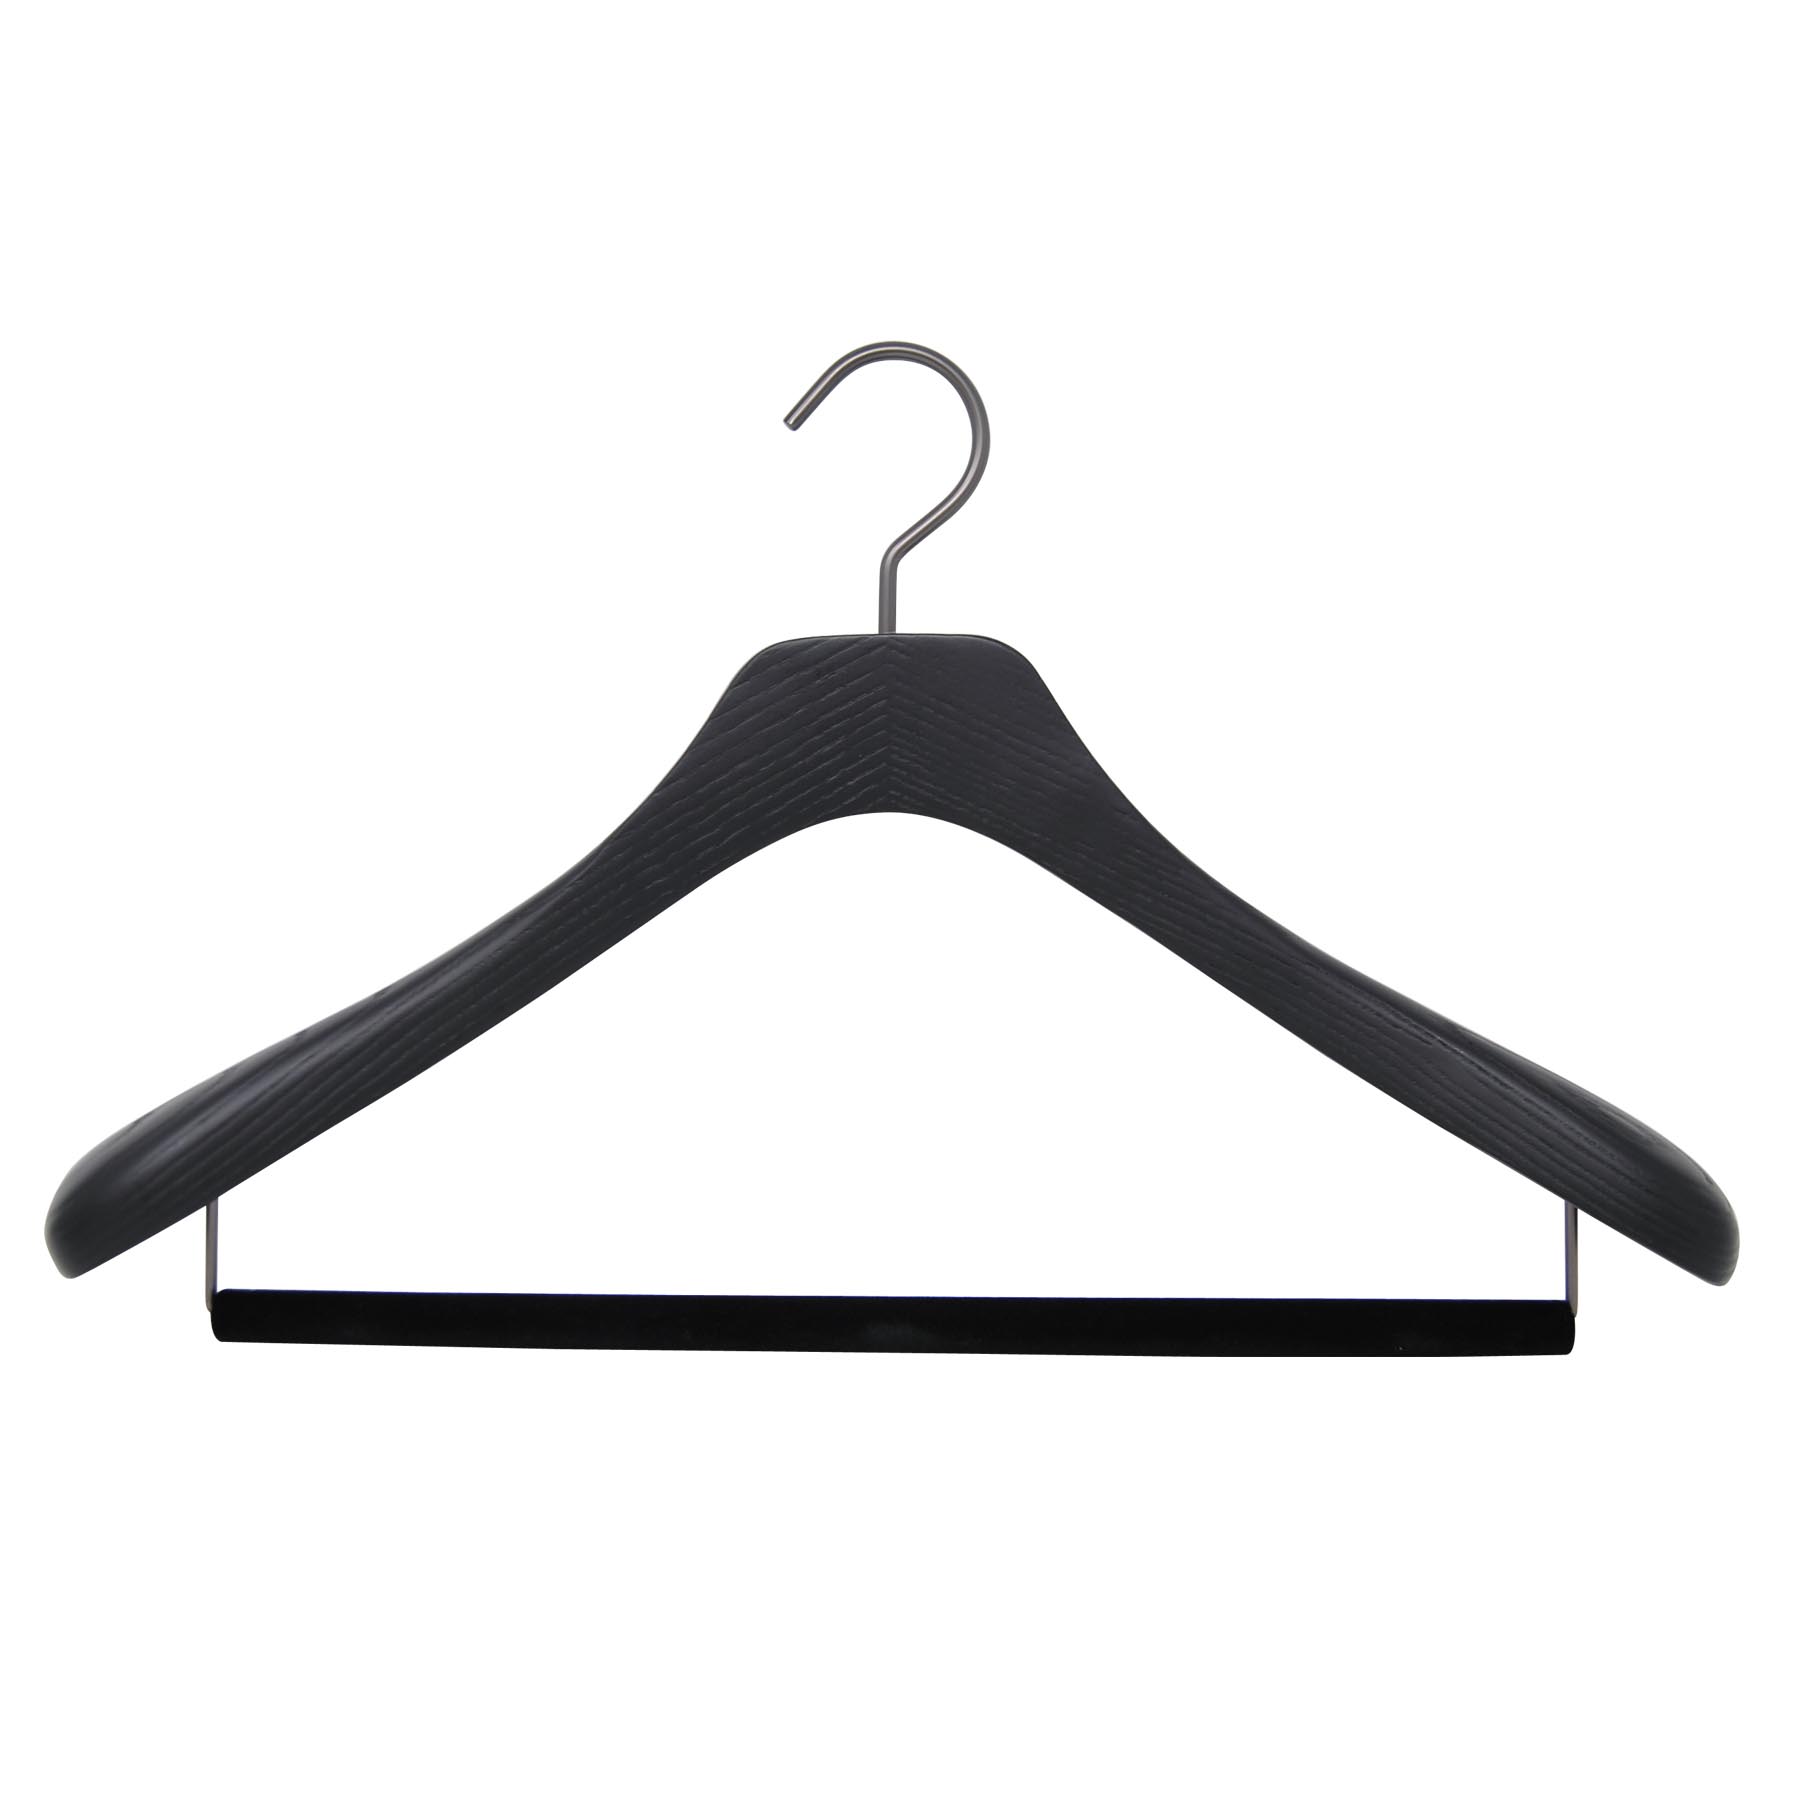 Luxury wooden suit hanger with large shoulder support